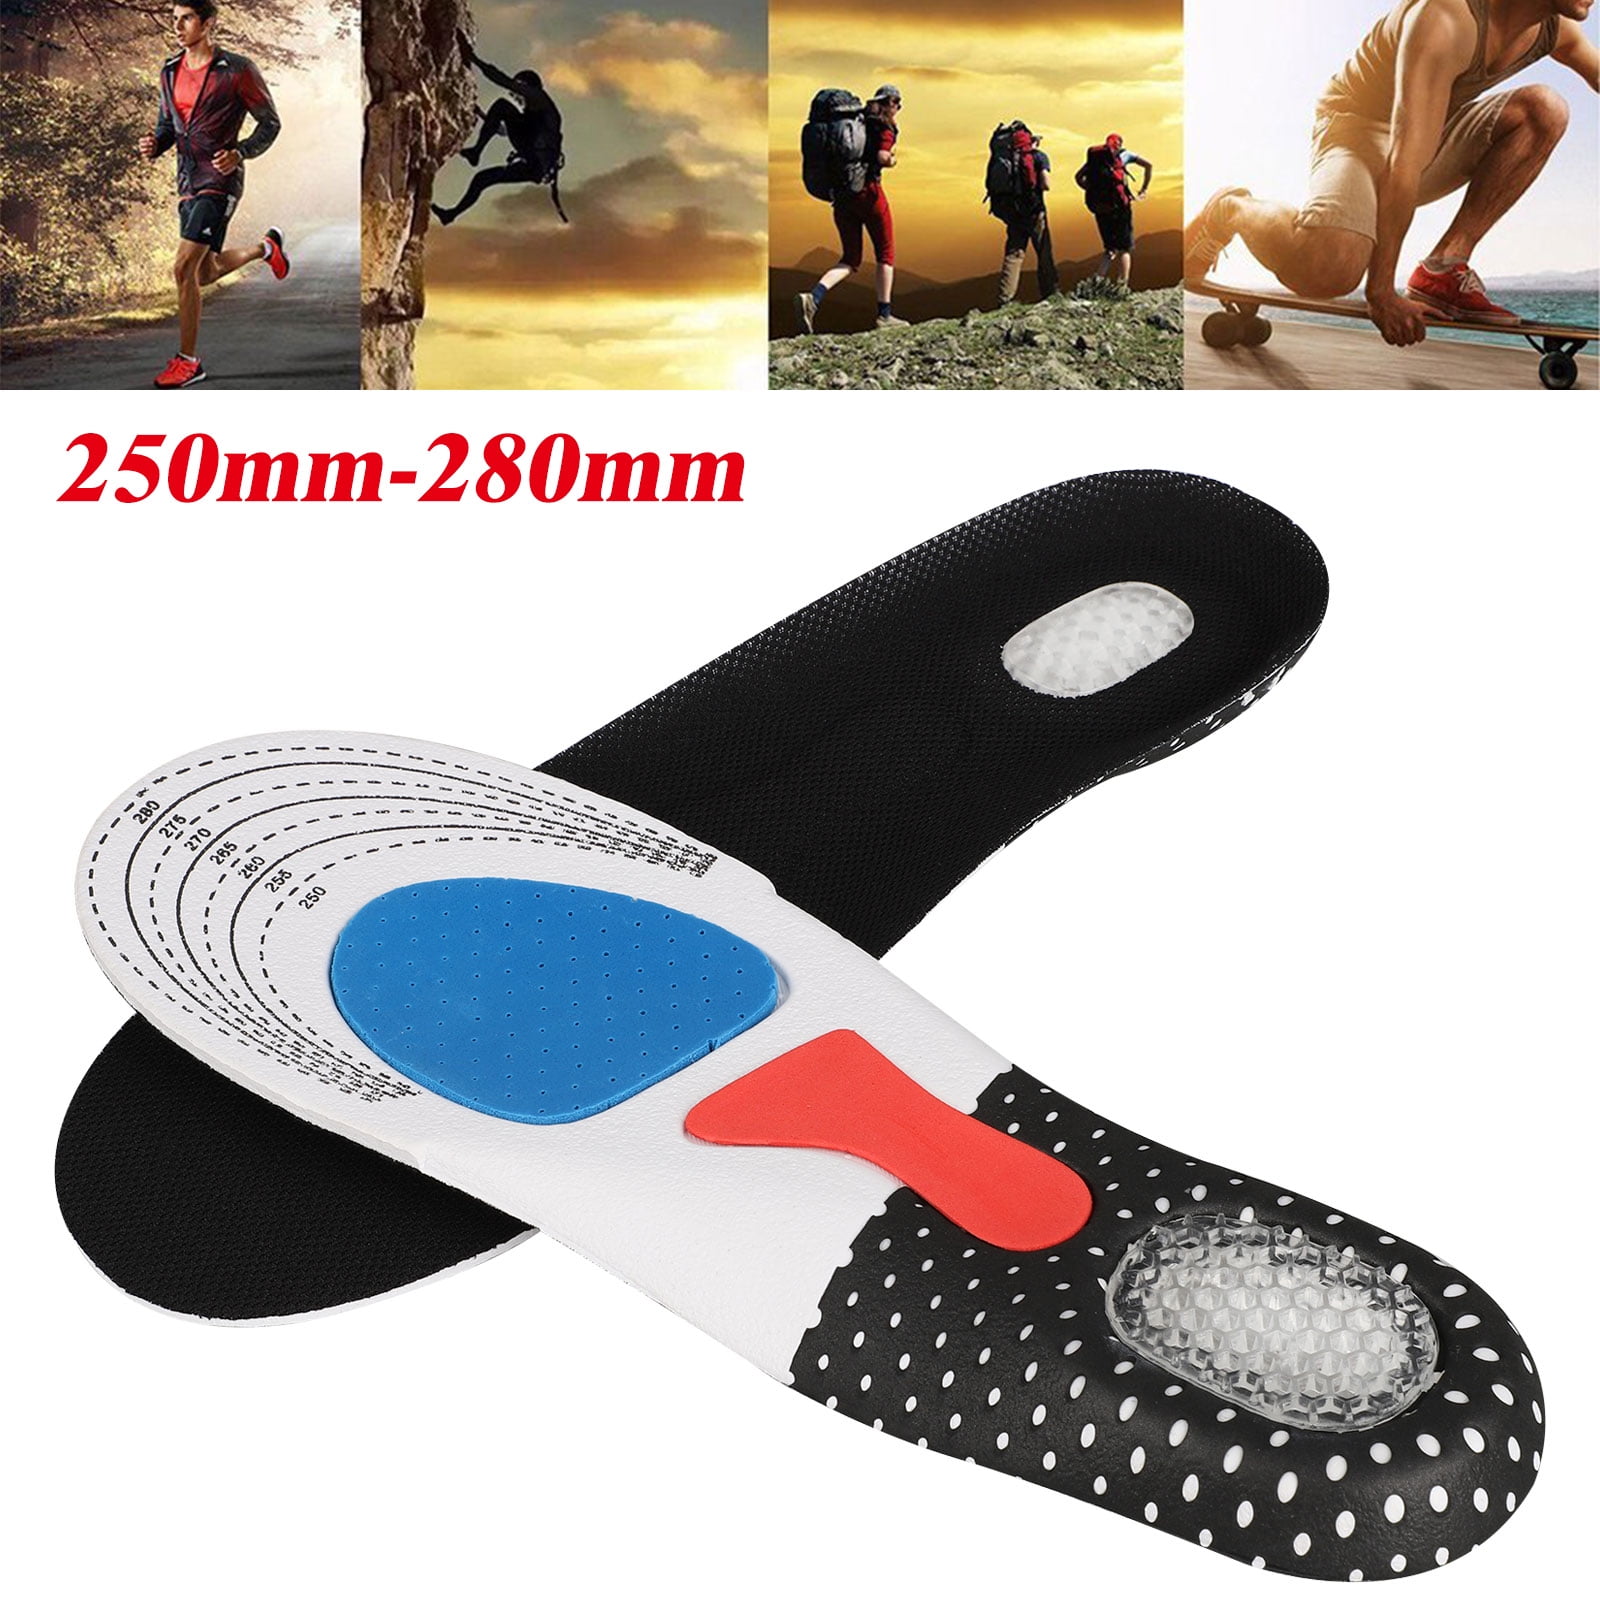 1x Orthotic Arch Support Sport Running Gel Cushion Heel Shoe Insole Pad Insert 